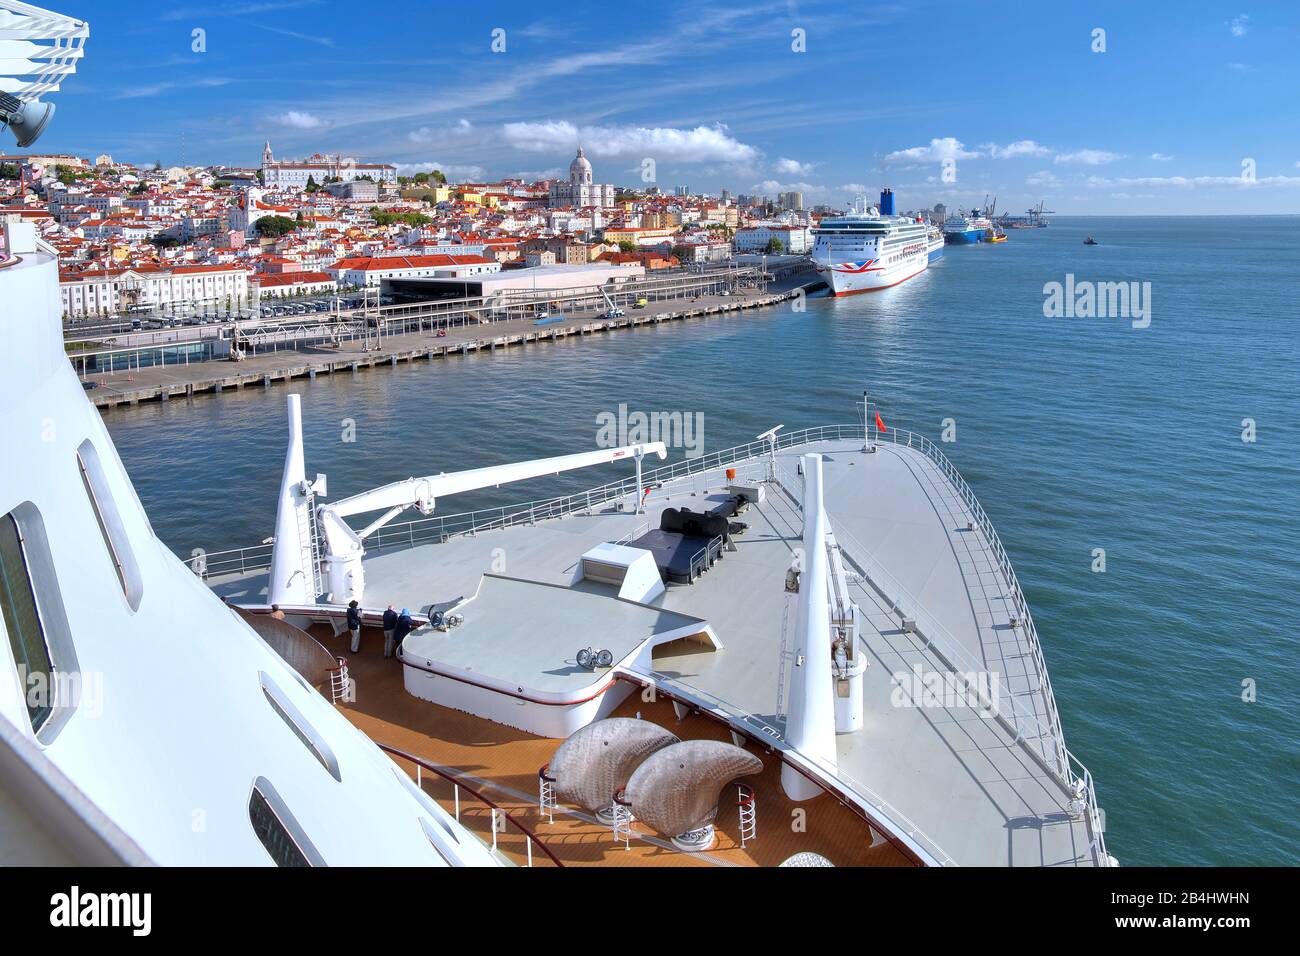 Foreship of the transatlantic liner Queen Mary 2 in front of the old town on the Tejo with the monastery Sao Vicente de Fora and the church of Santa Engracia, Lisbon, Portugal Stock Photo